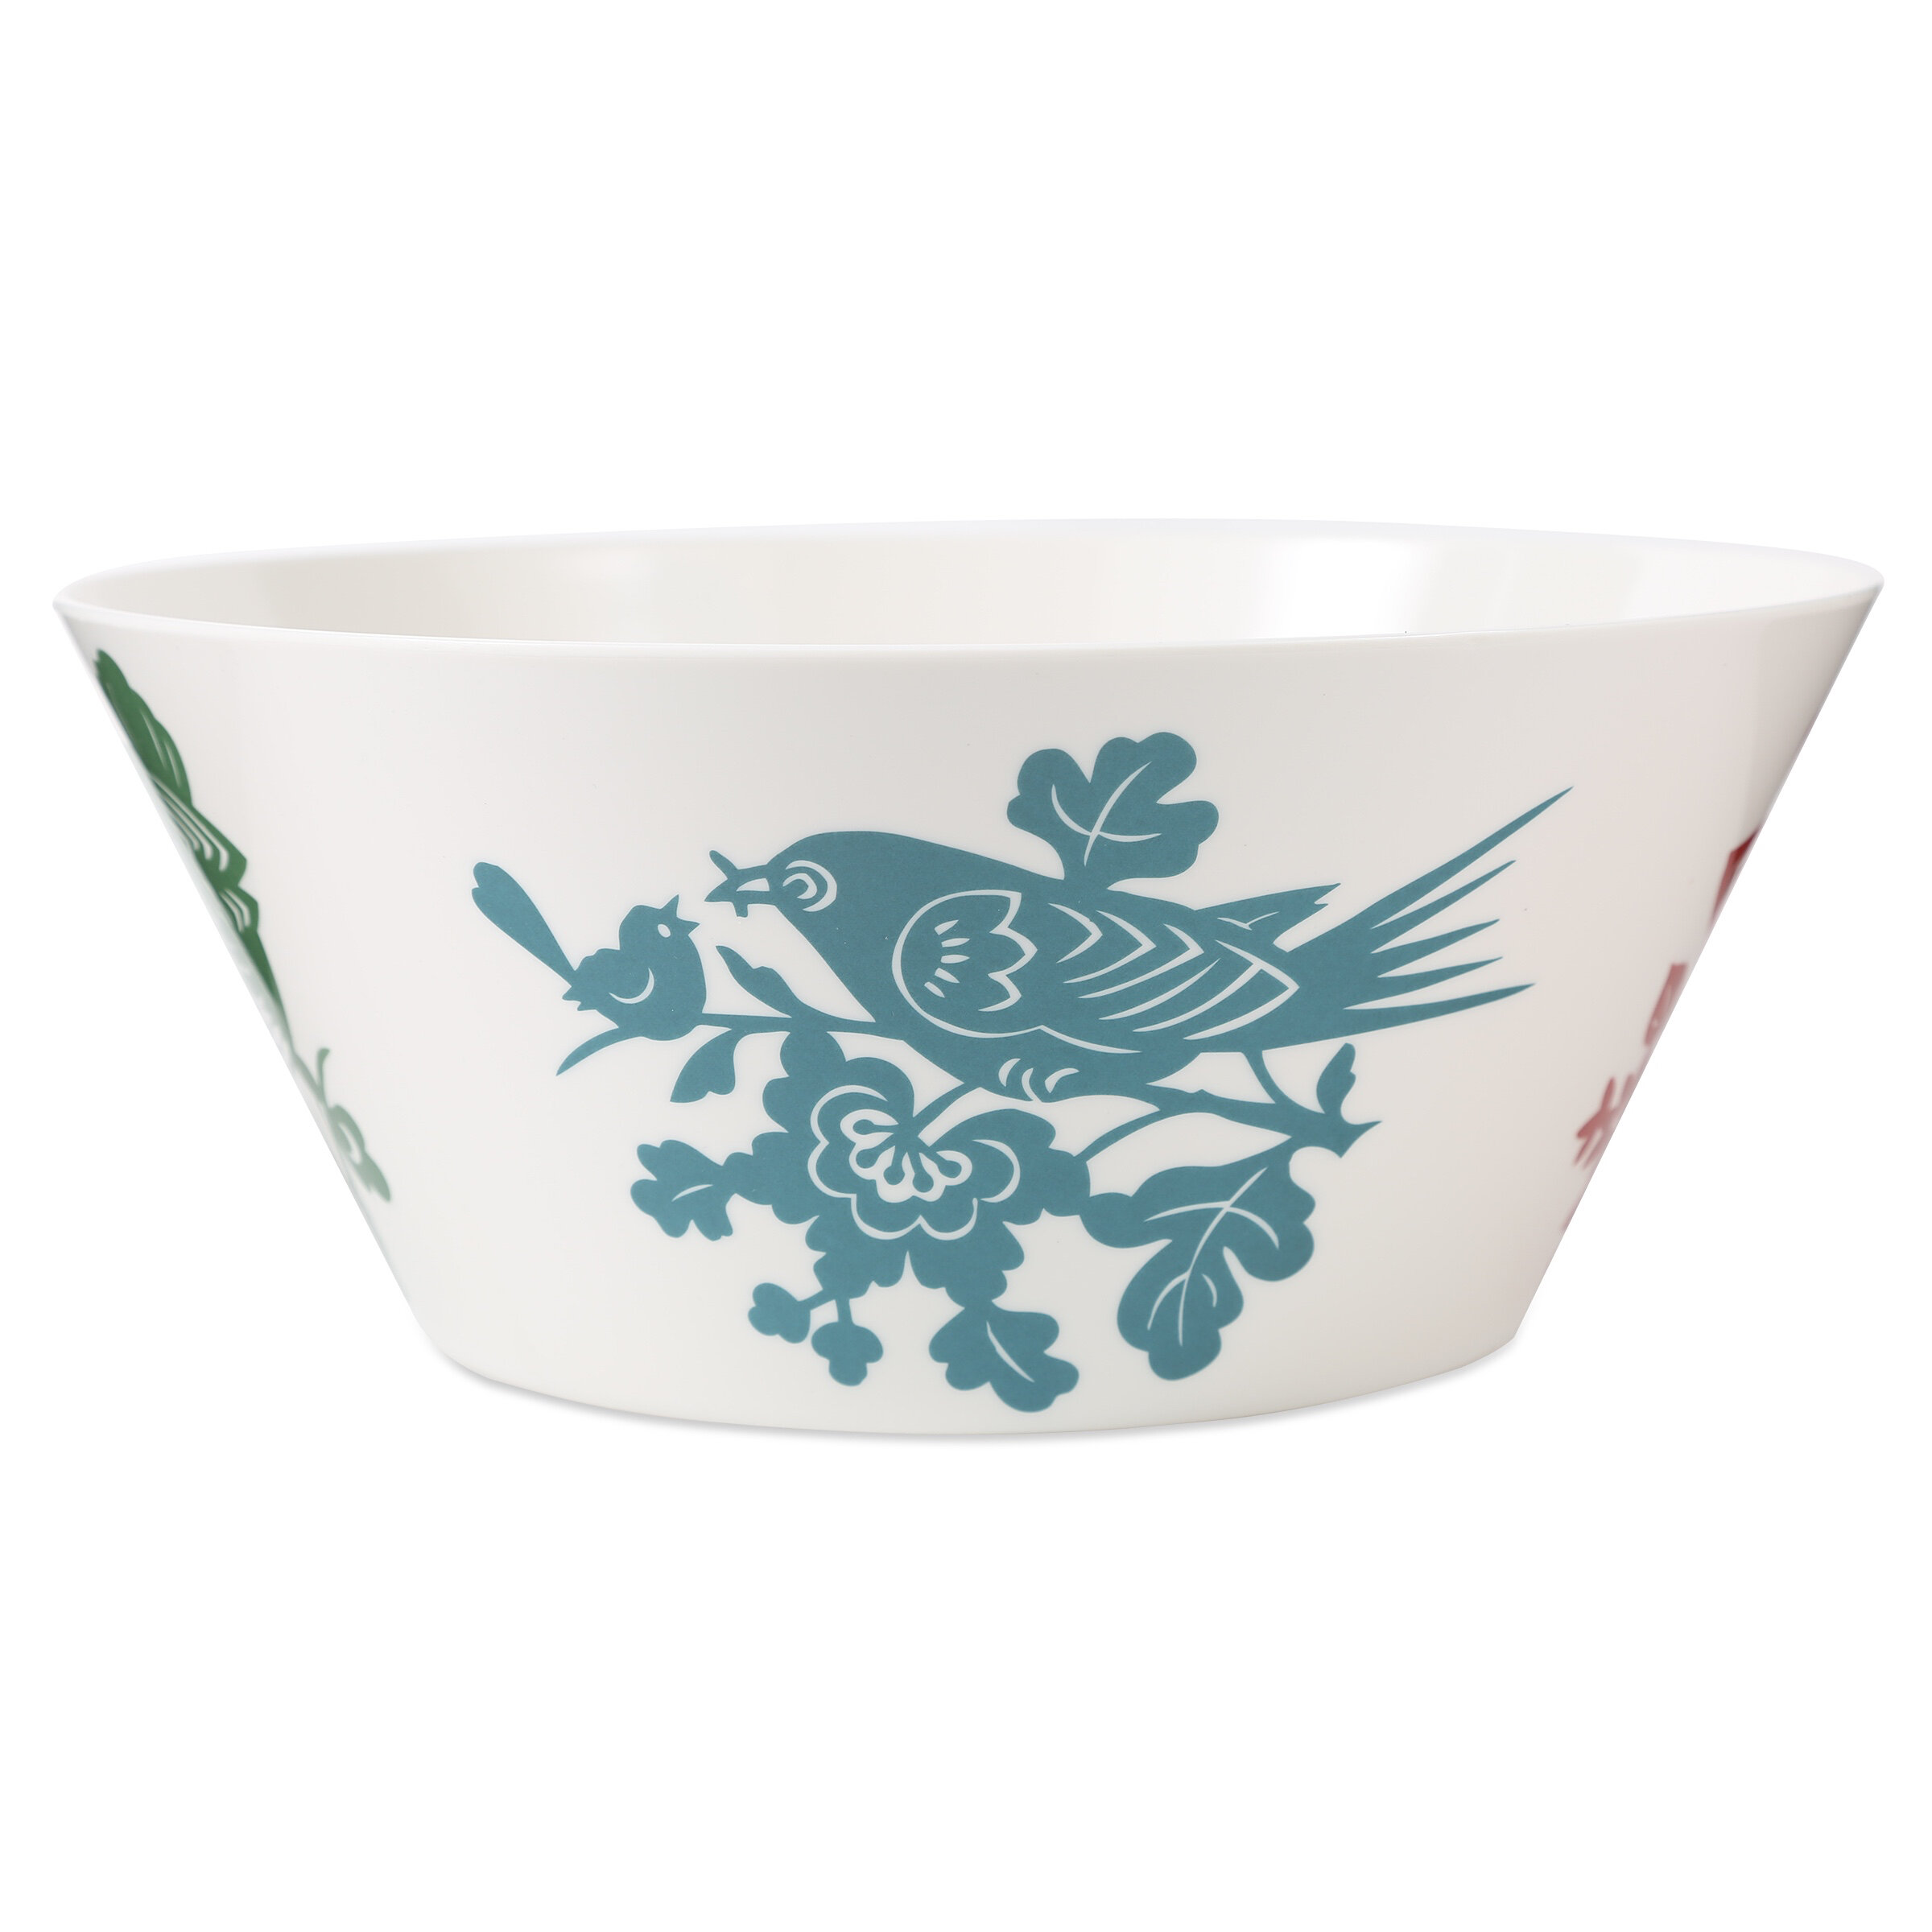 Hokku Designs Wheat Straw Bowls 24 Oz Unbreakable Cereal Bowls